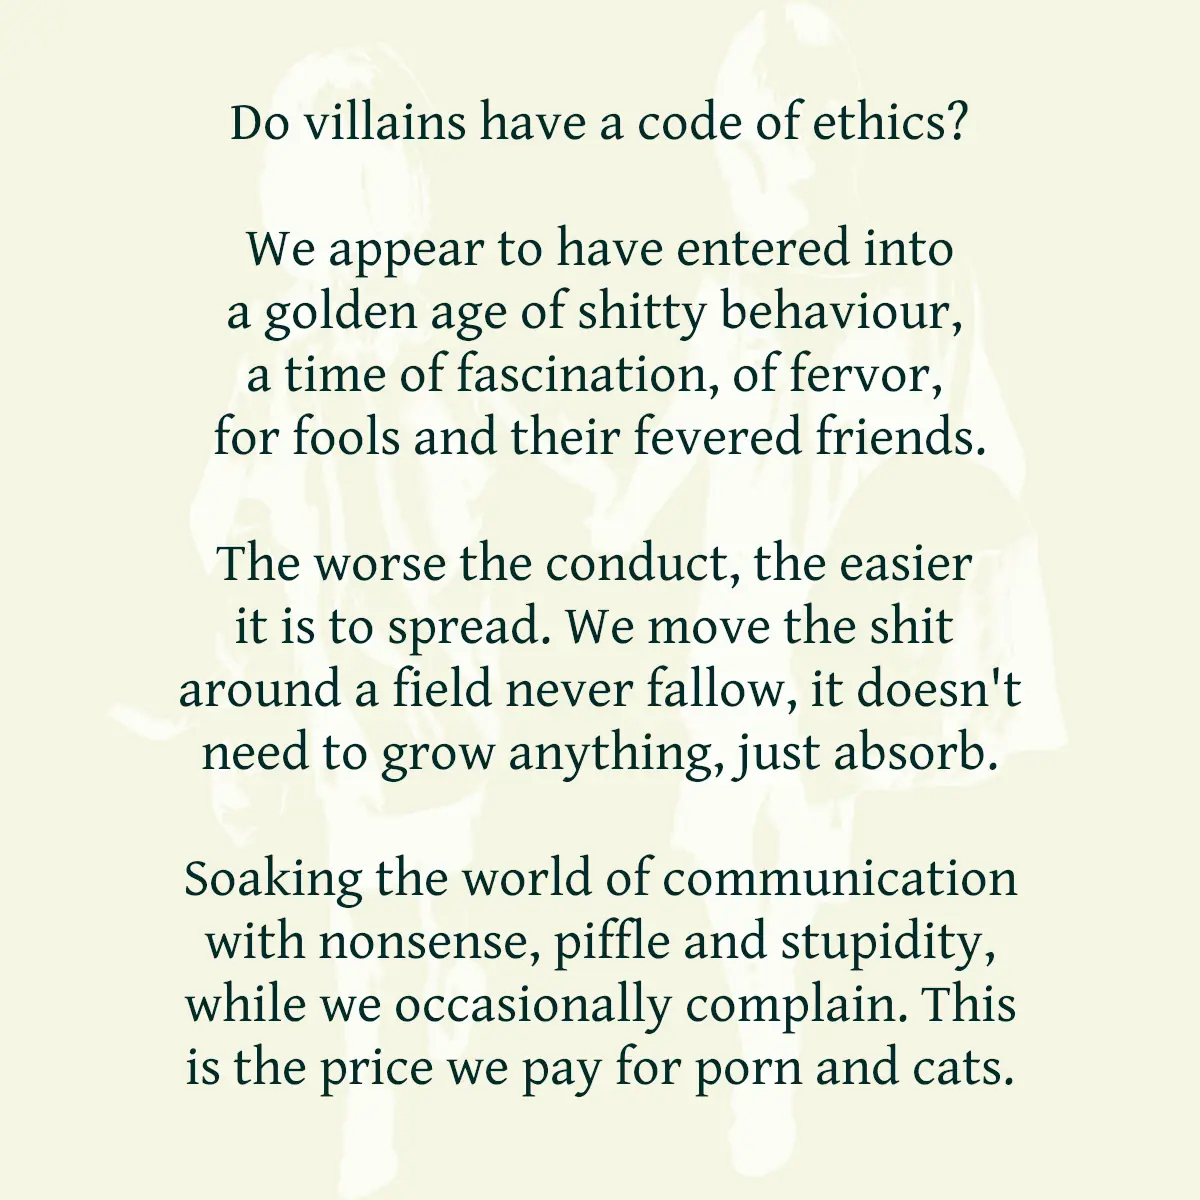 Do villains have a code of ethics? We appear to have entered into a golden age of shitty behaviour, a time of fascination, of fervor, for fools and their fevered friends. The worse the conduct, the easier it is to spread. We move the shit around a field never fallow, it doesn't need to grow anything, just absorb. Soaking the world of communication with nonsense, piffle and stupidity, while we occasionally complain. This is the price we pay for porn and cats.